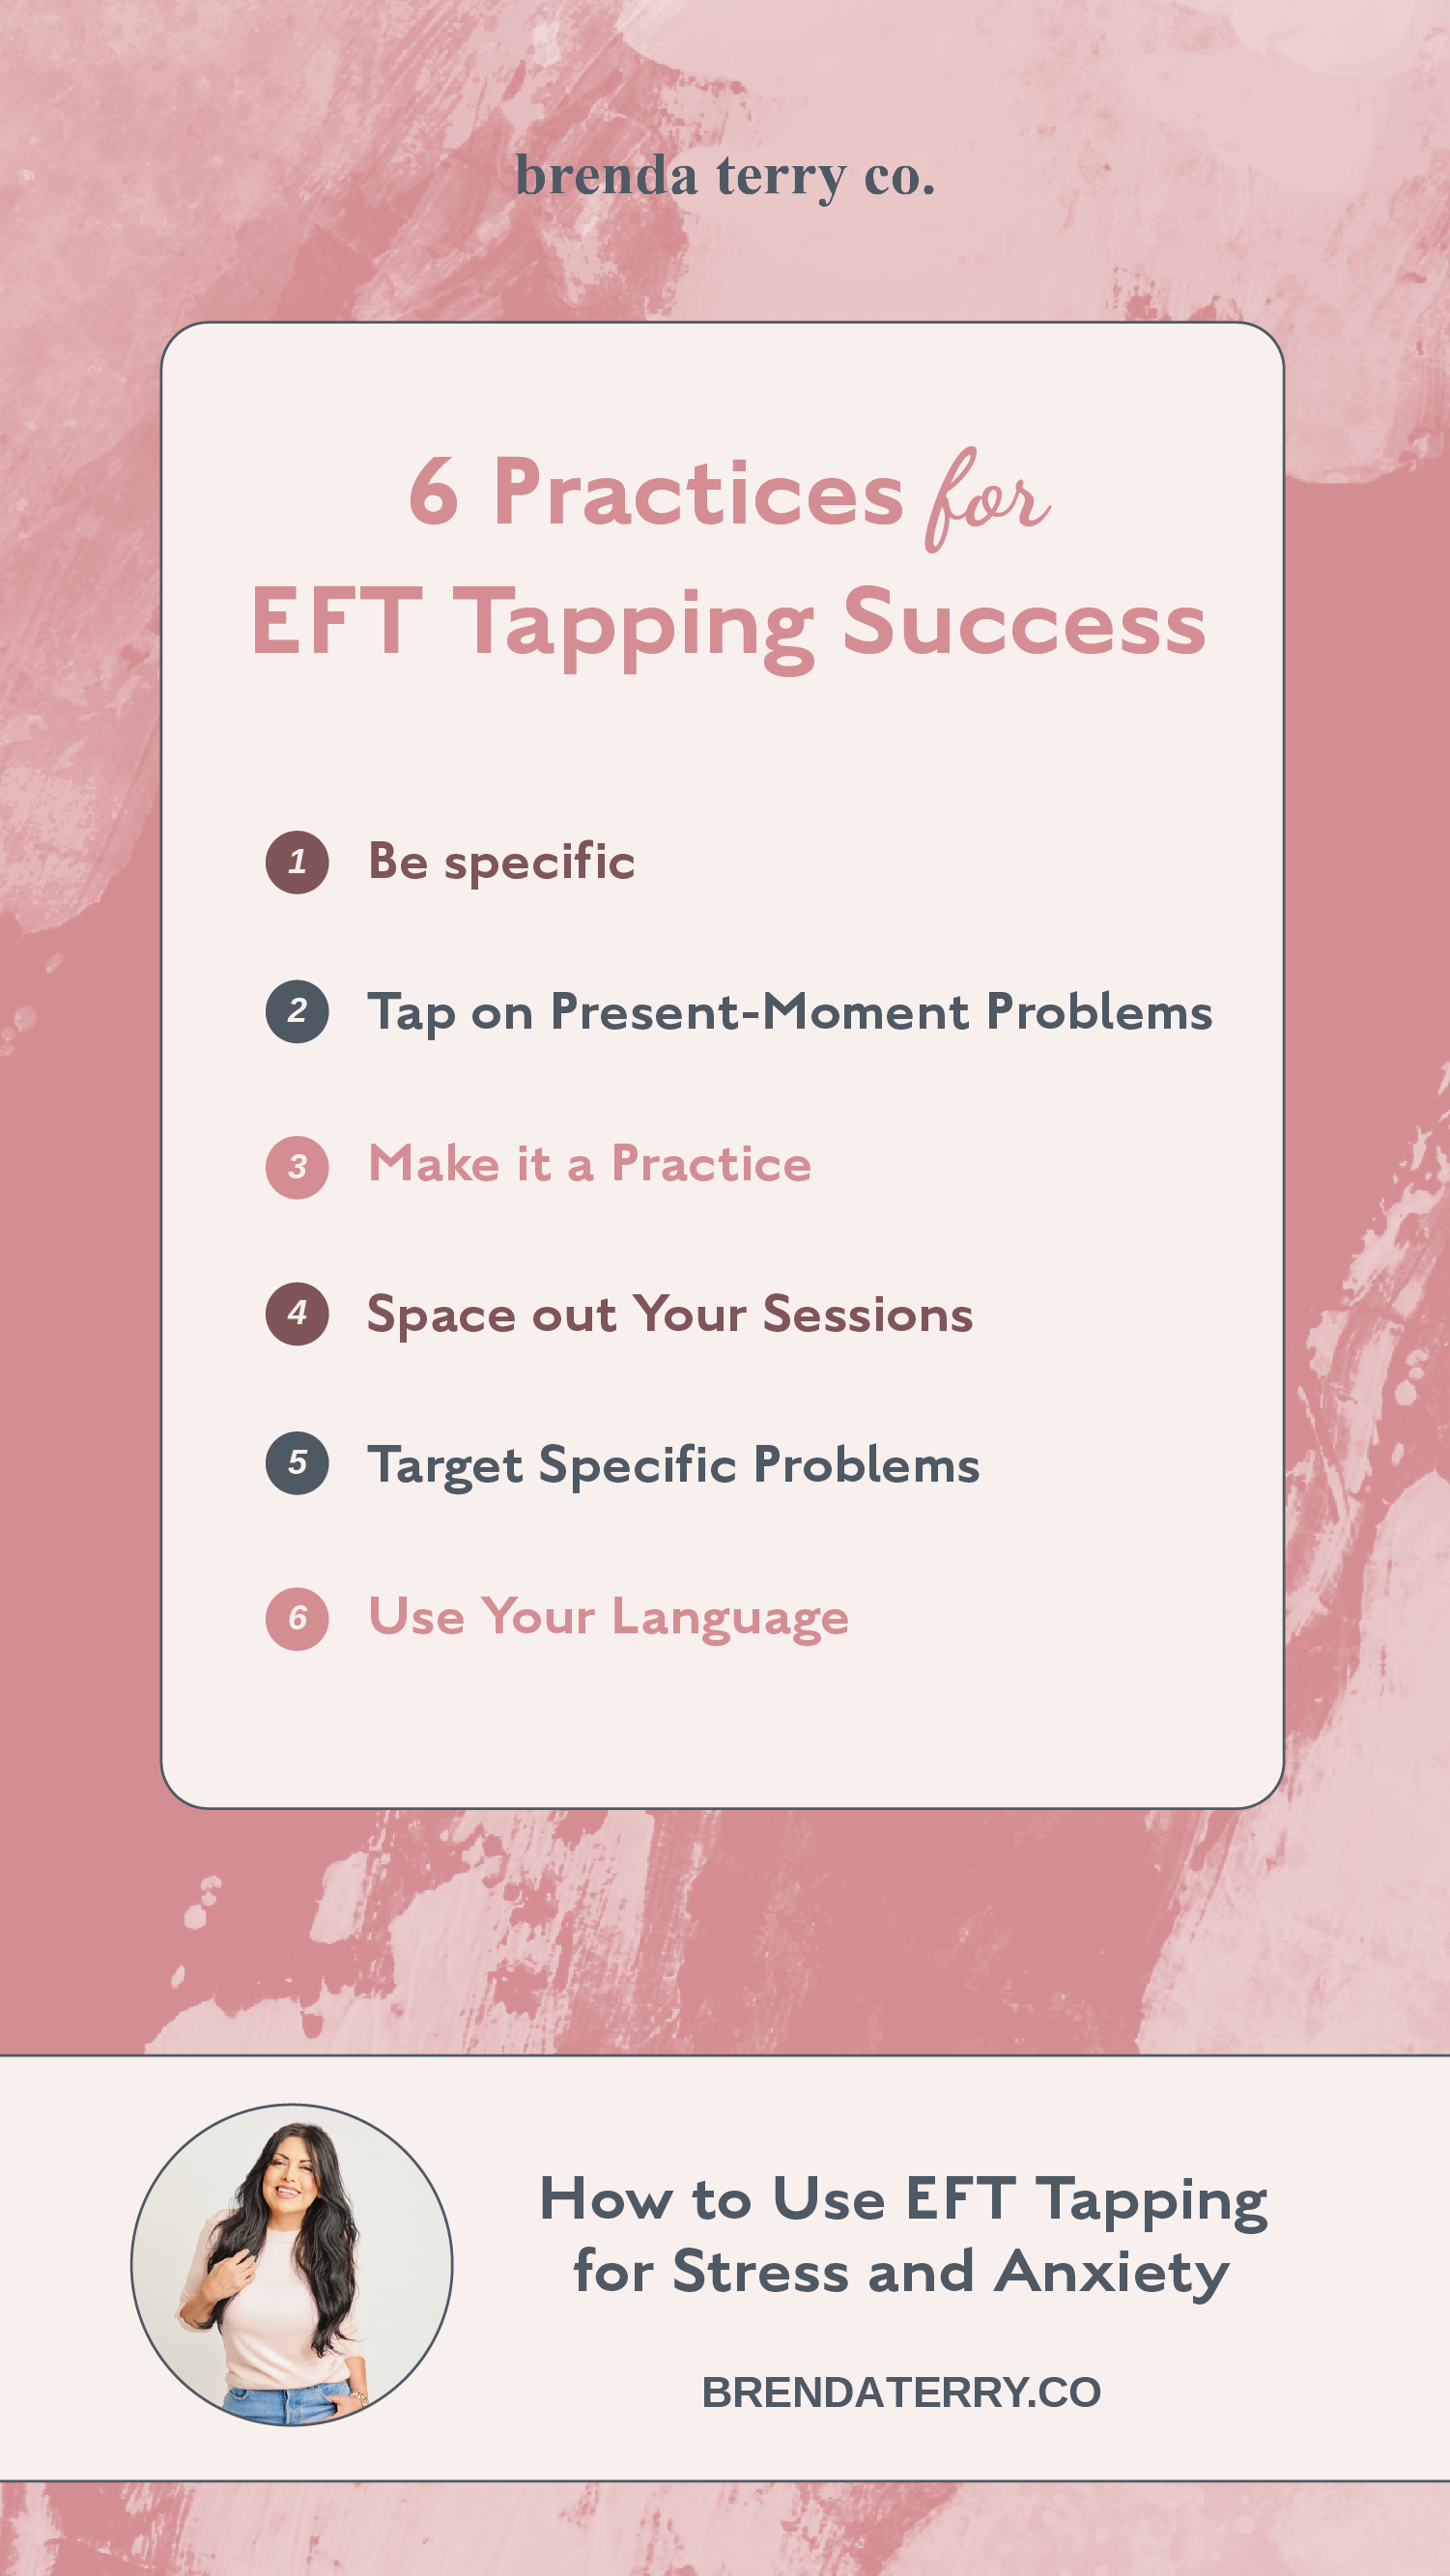 EFT Tapping Success: 6 Key Practices